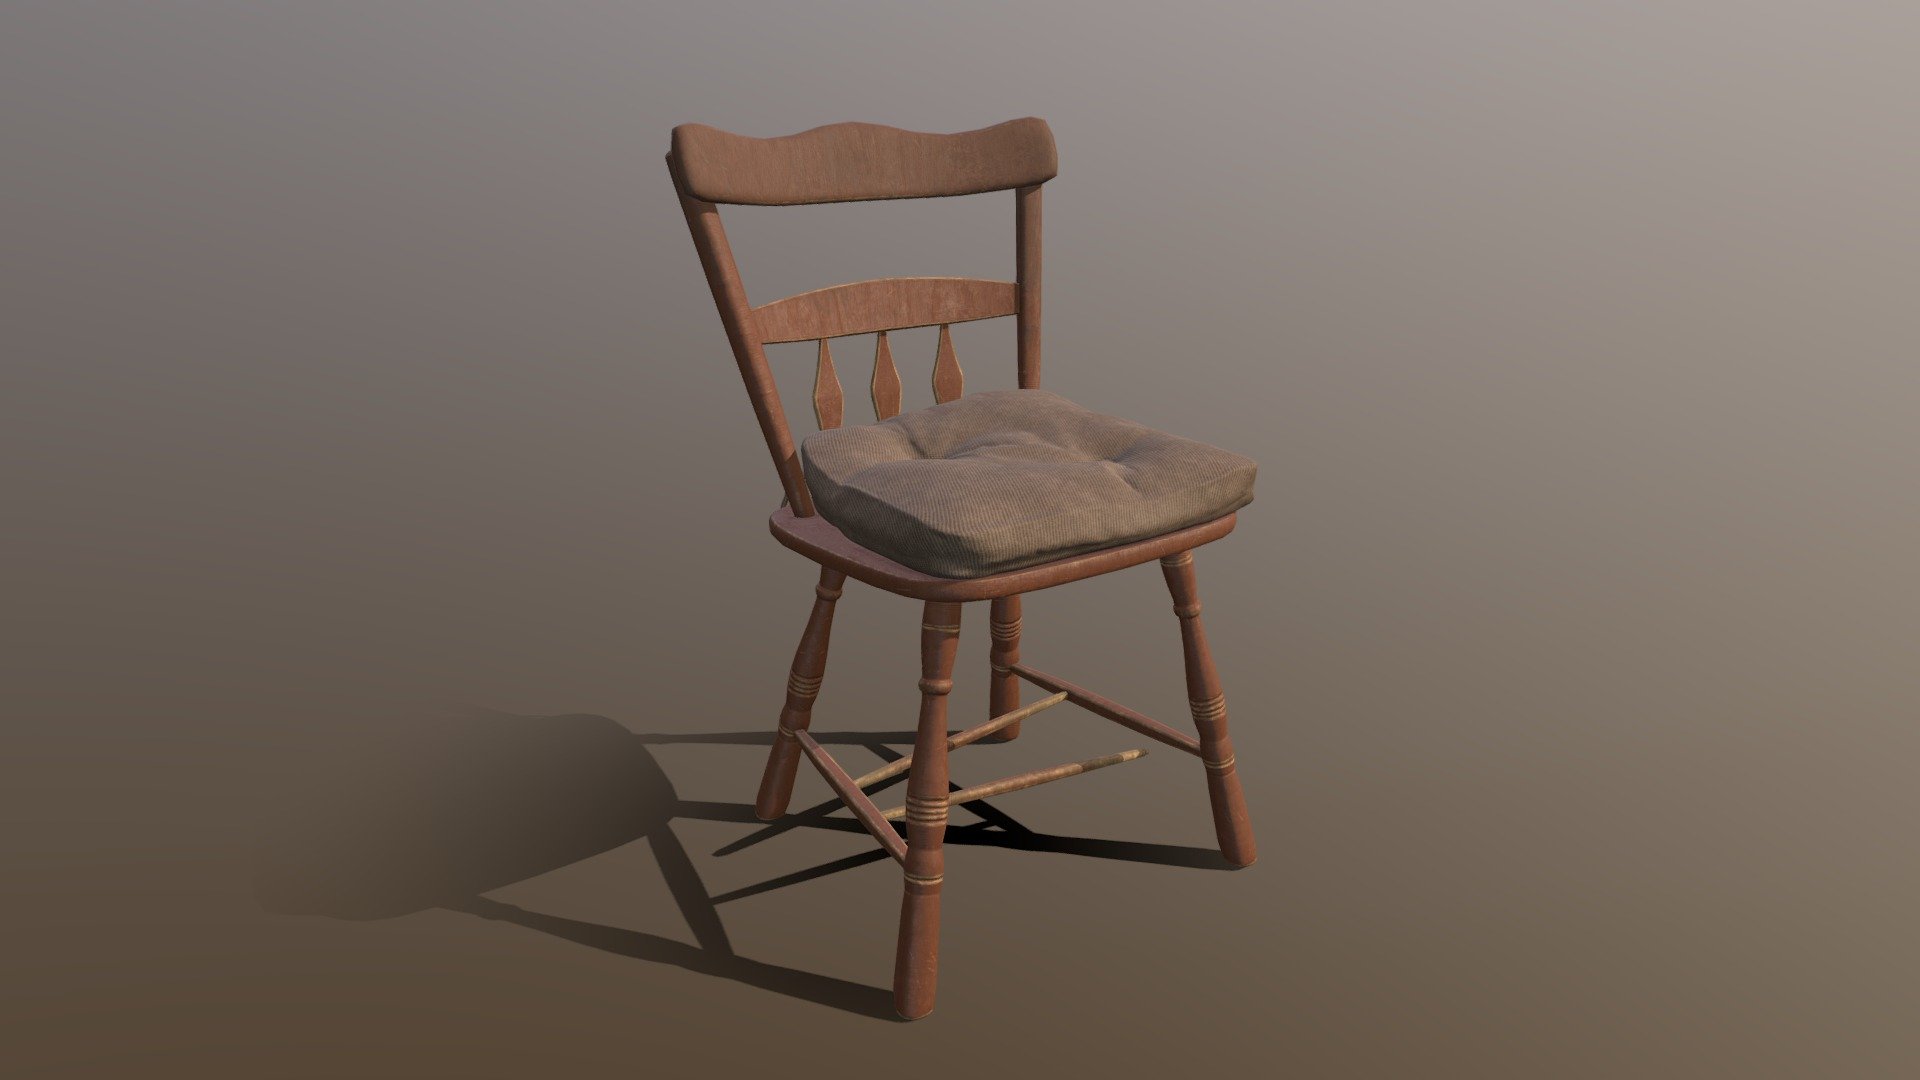 Wooden Chair made with professional standards.

Low-medium poly and ready for a game environment, modeled to real world scale. Includes several file formats to use (fbx, ma, obj, stl) along with Basecolor, Normal, Roughness, and ORM maps at 1k, 2k, and 4k resolution 3d model